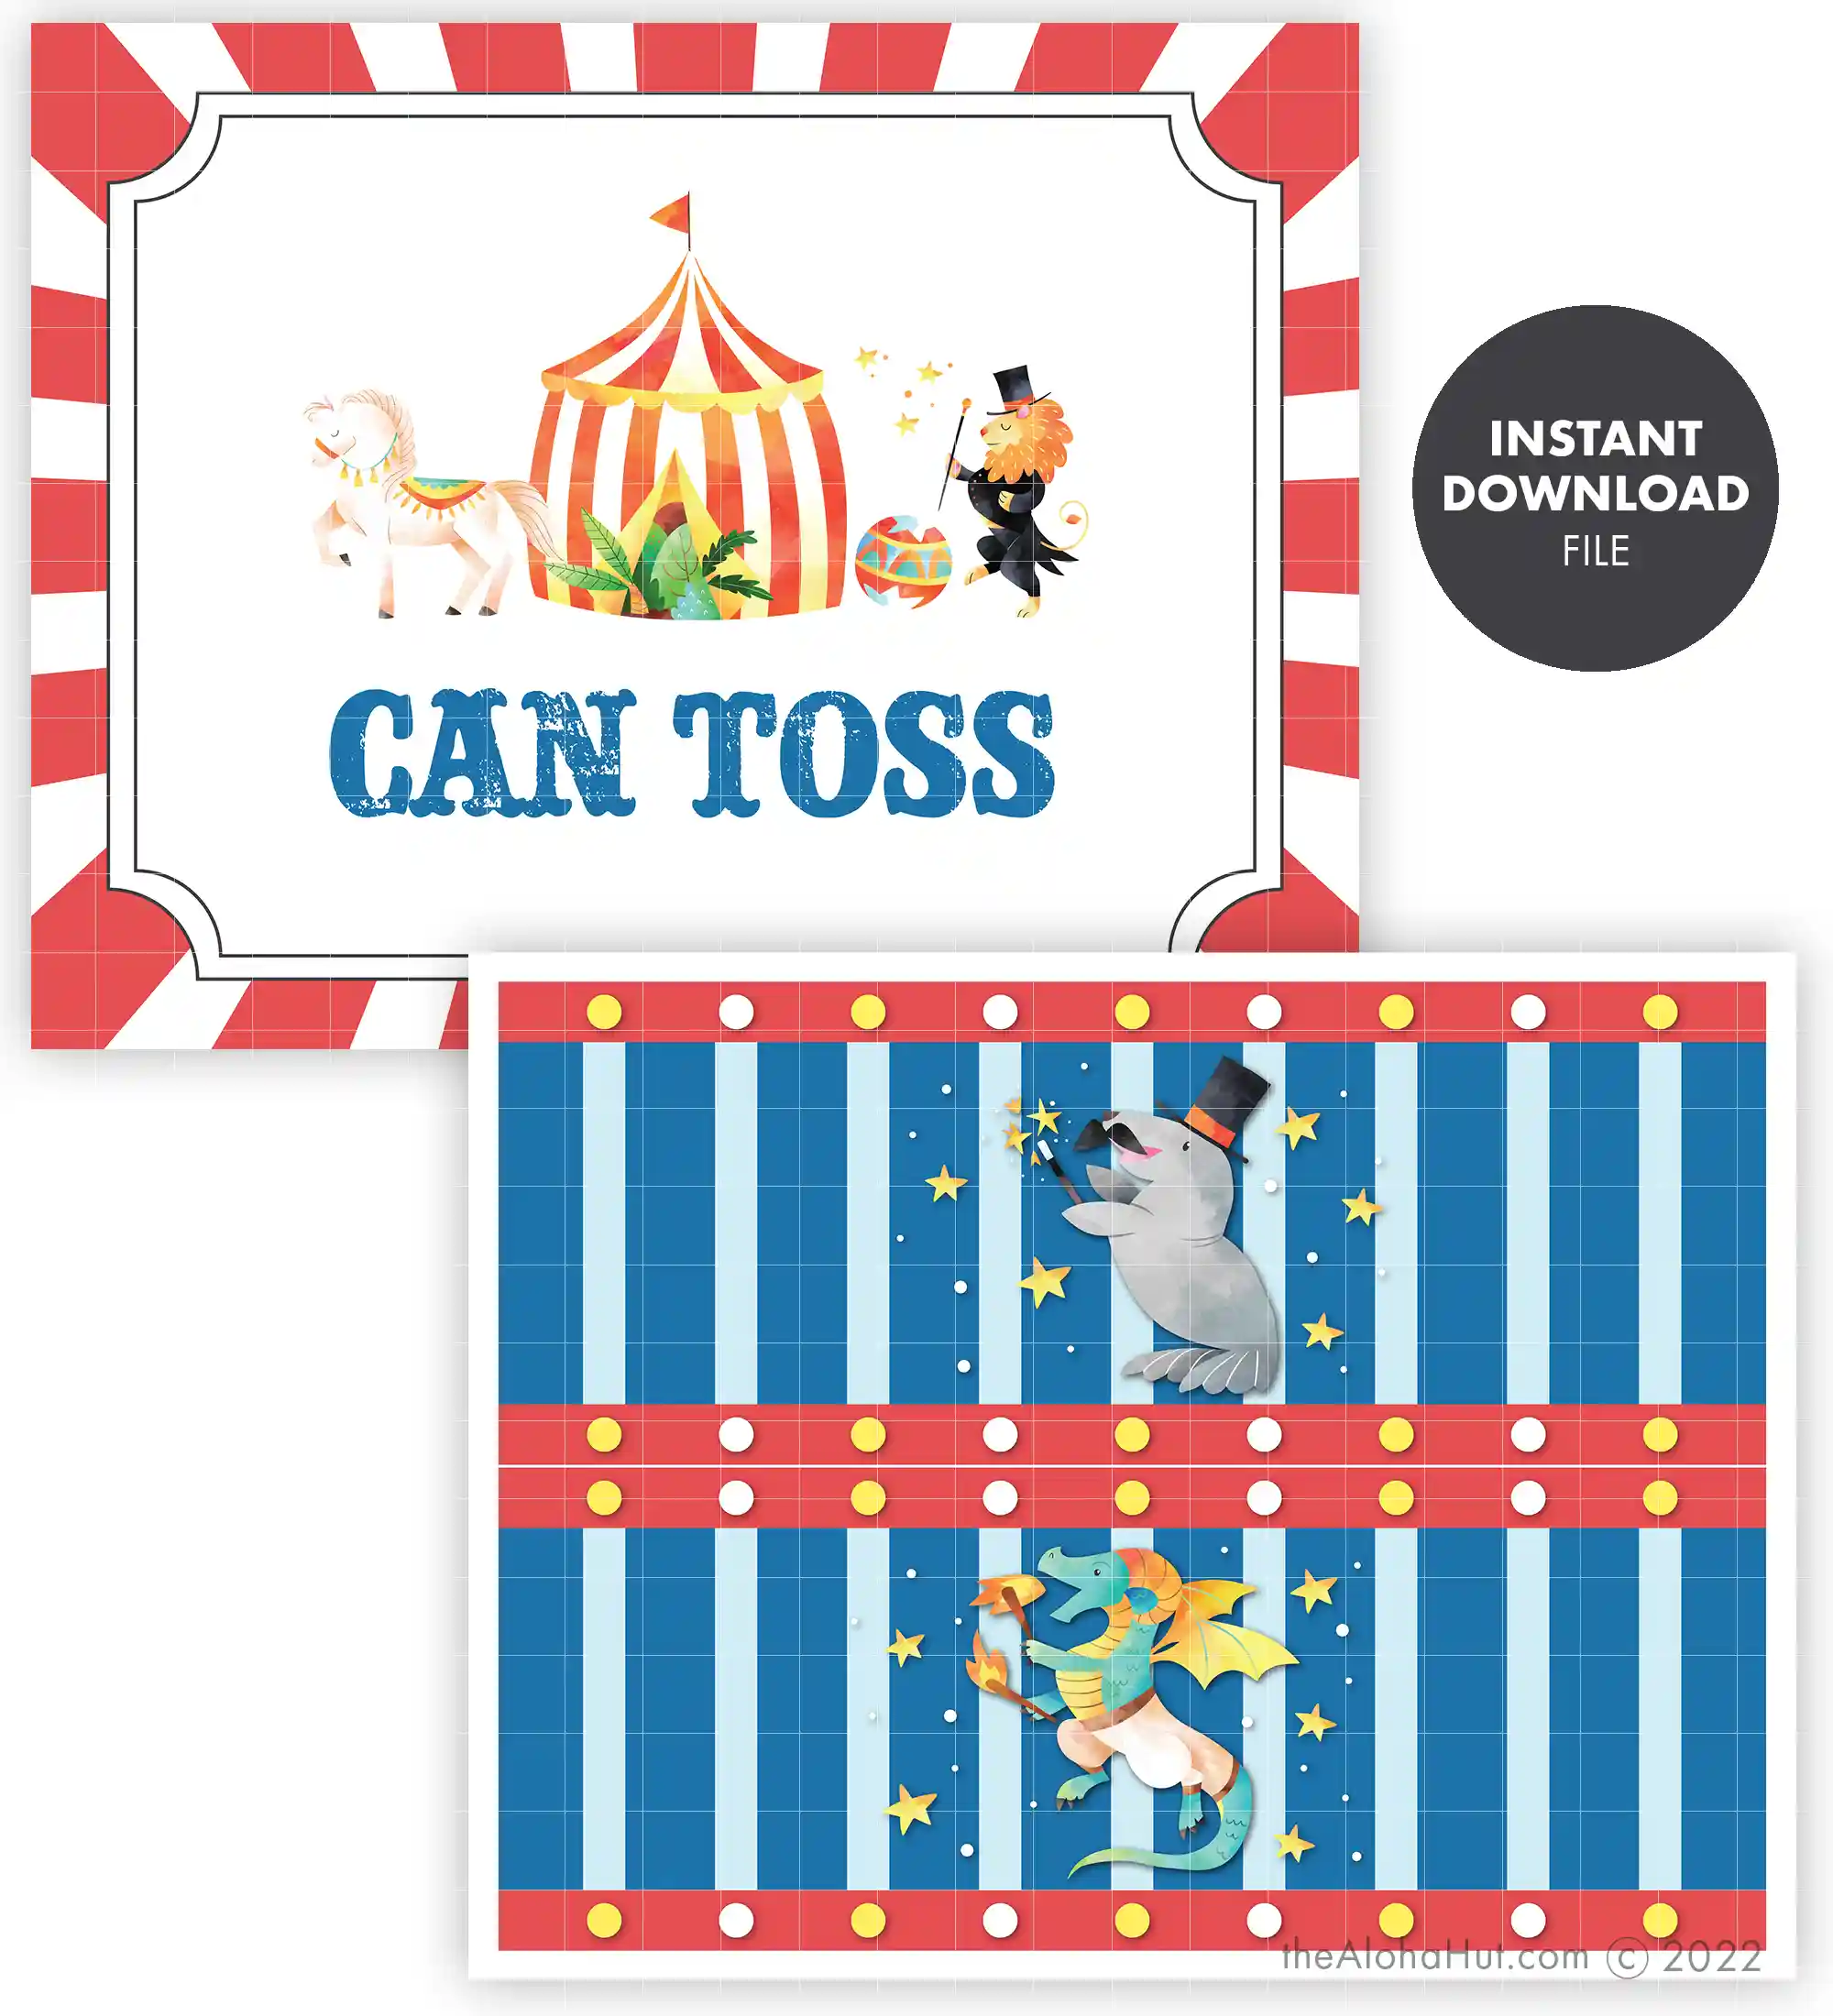 Can toss printable party game for a cheap and easy circus party or carnival booth.